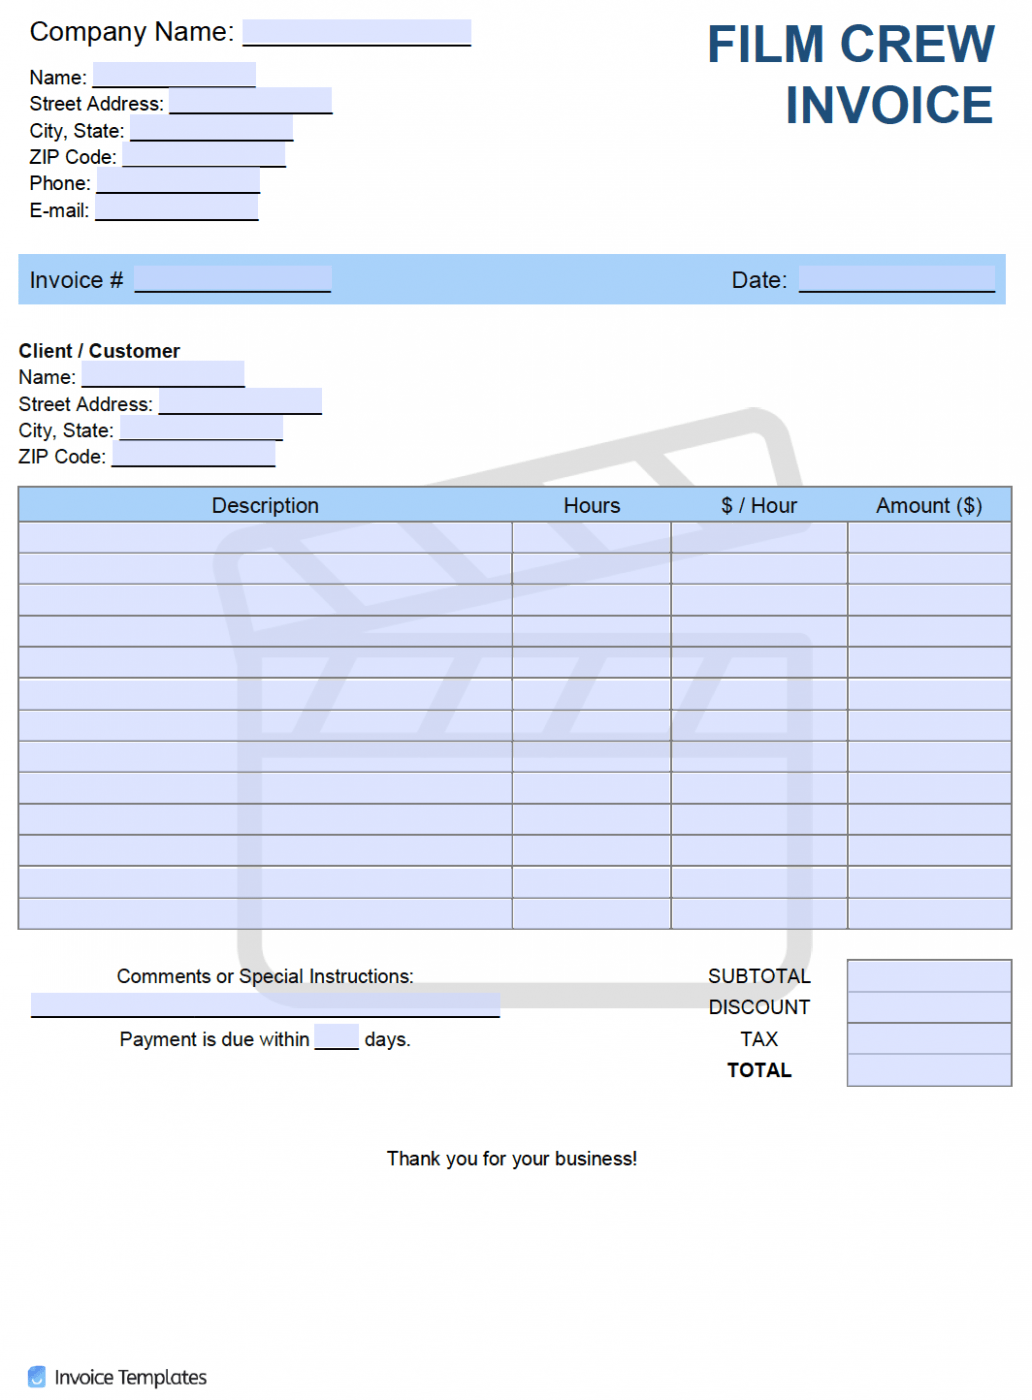 Film Production Invoice Template